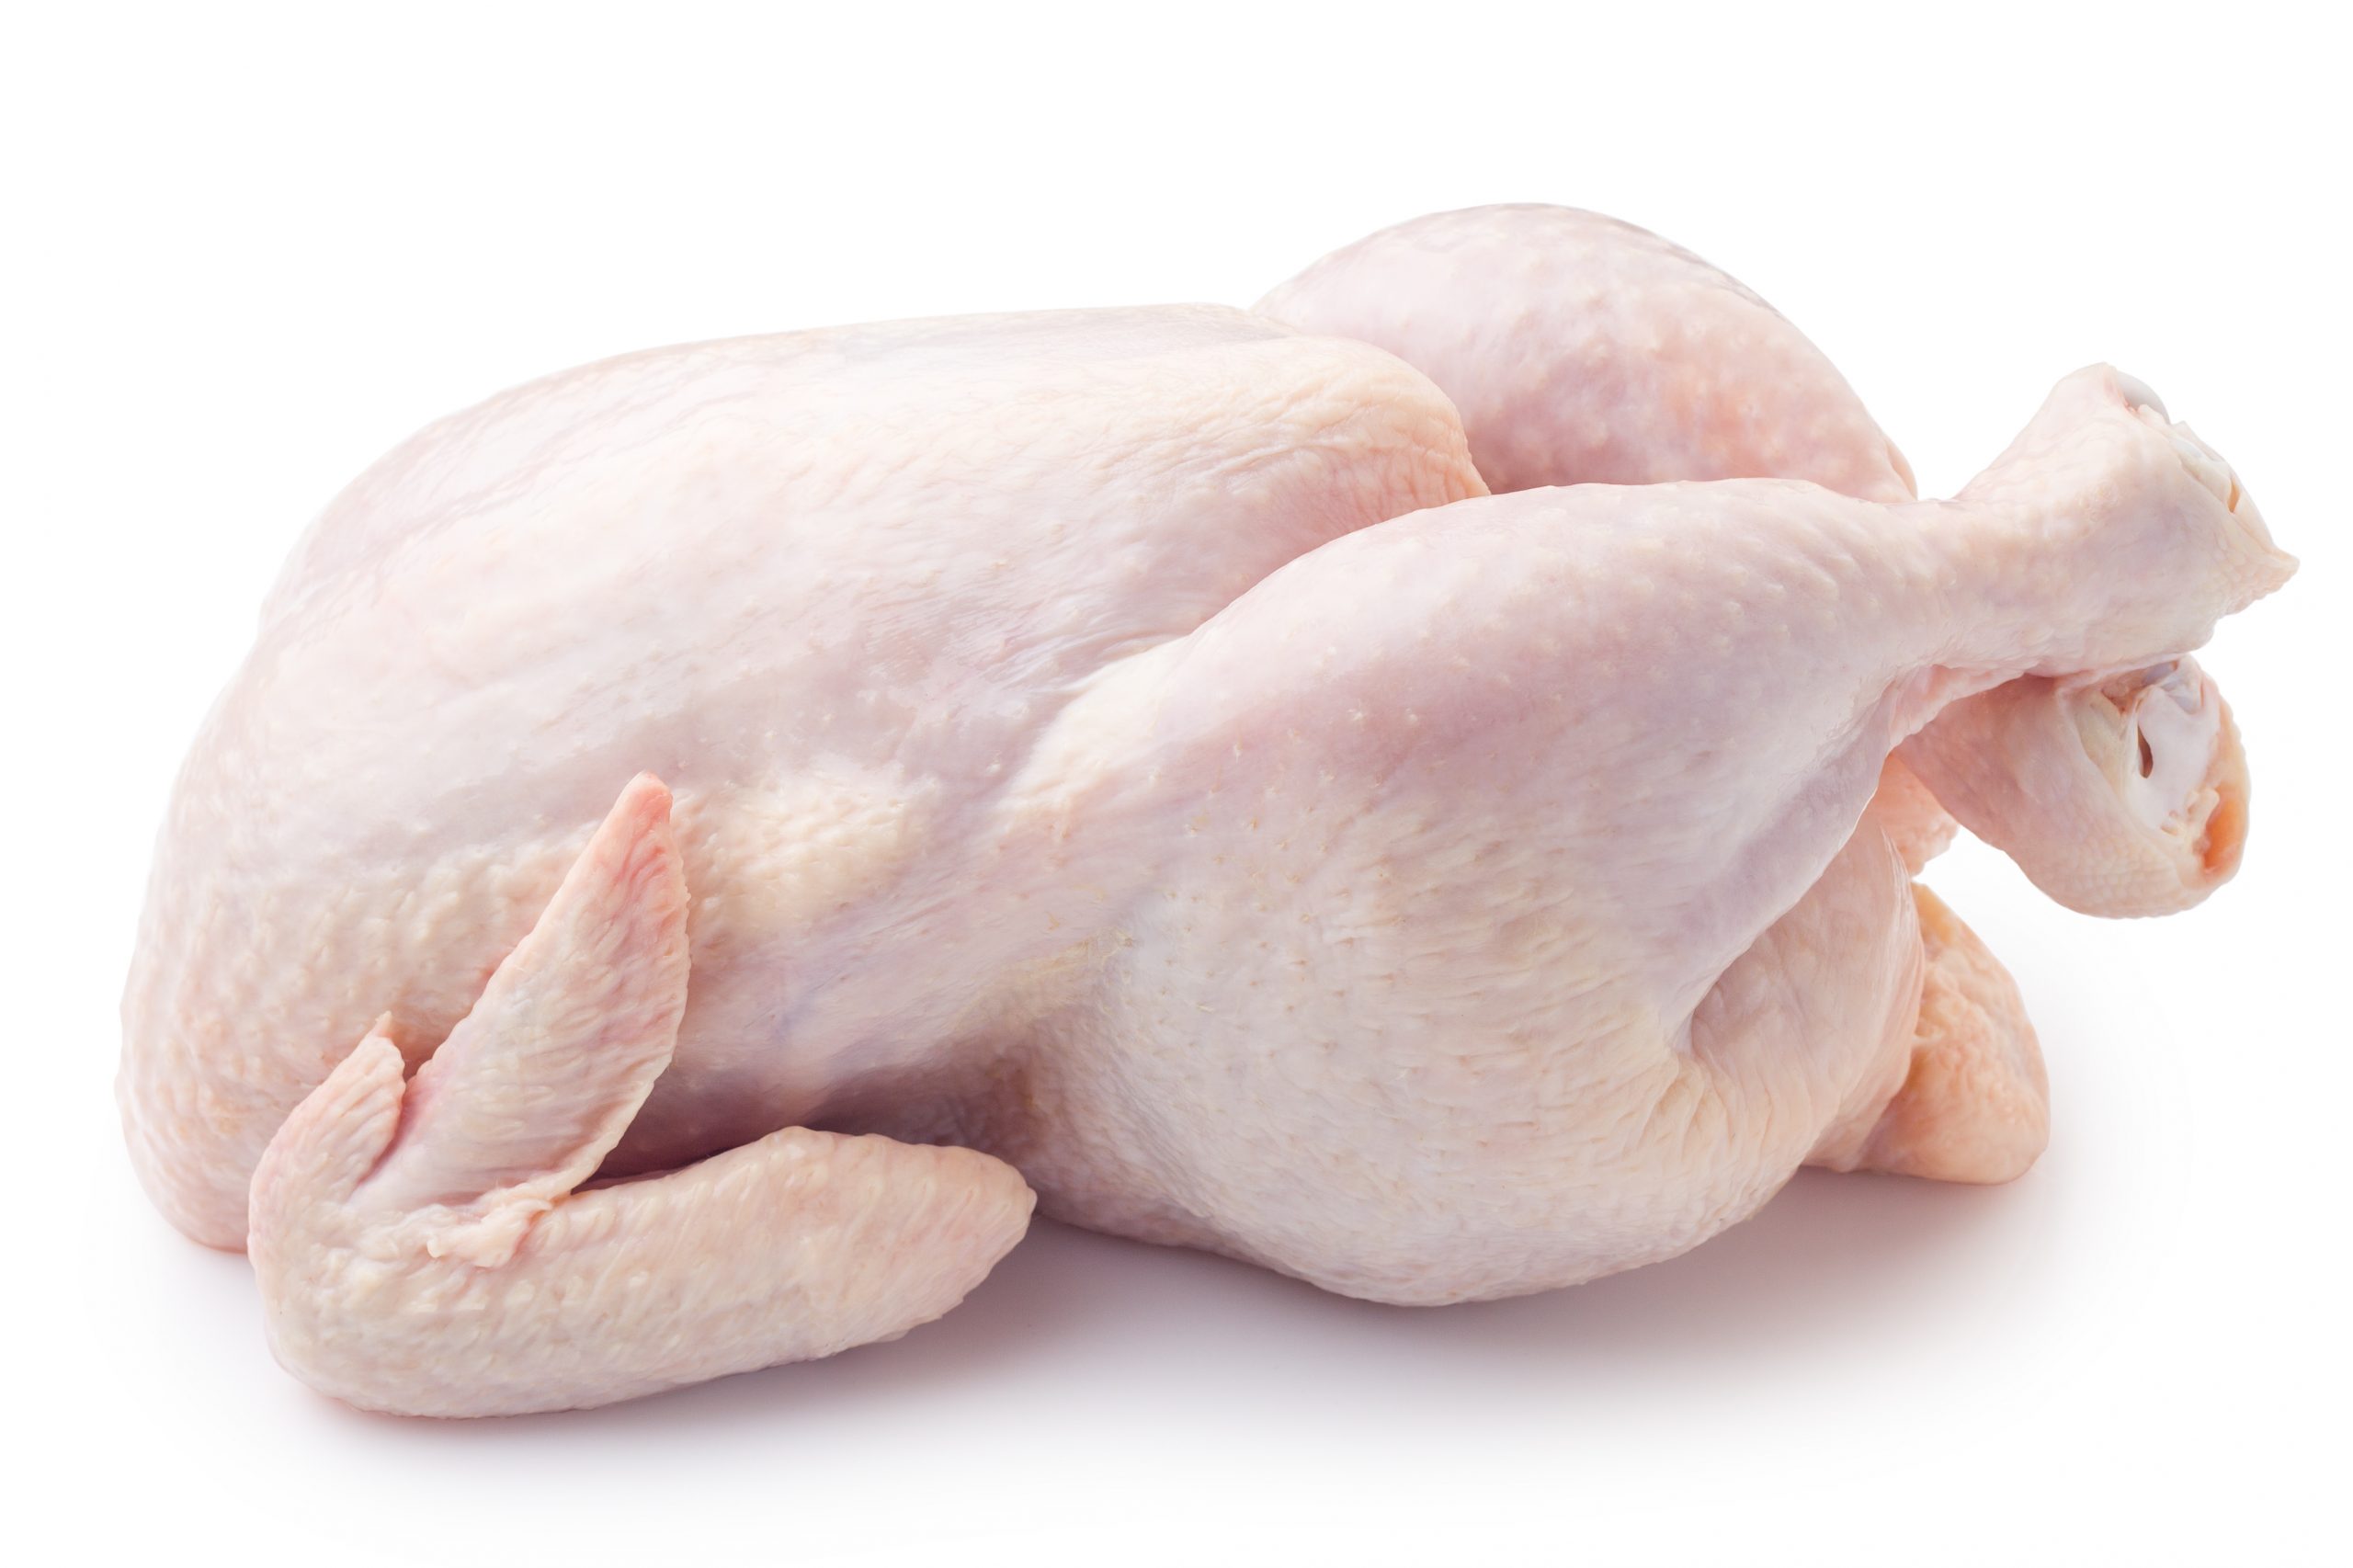 https://www.bowrivermeatmarket.ca/wp-content/uploads/2020/04/WHOLE-GRADE-A-CHICKENS-scaled.jpeg